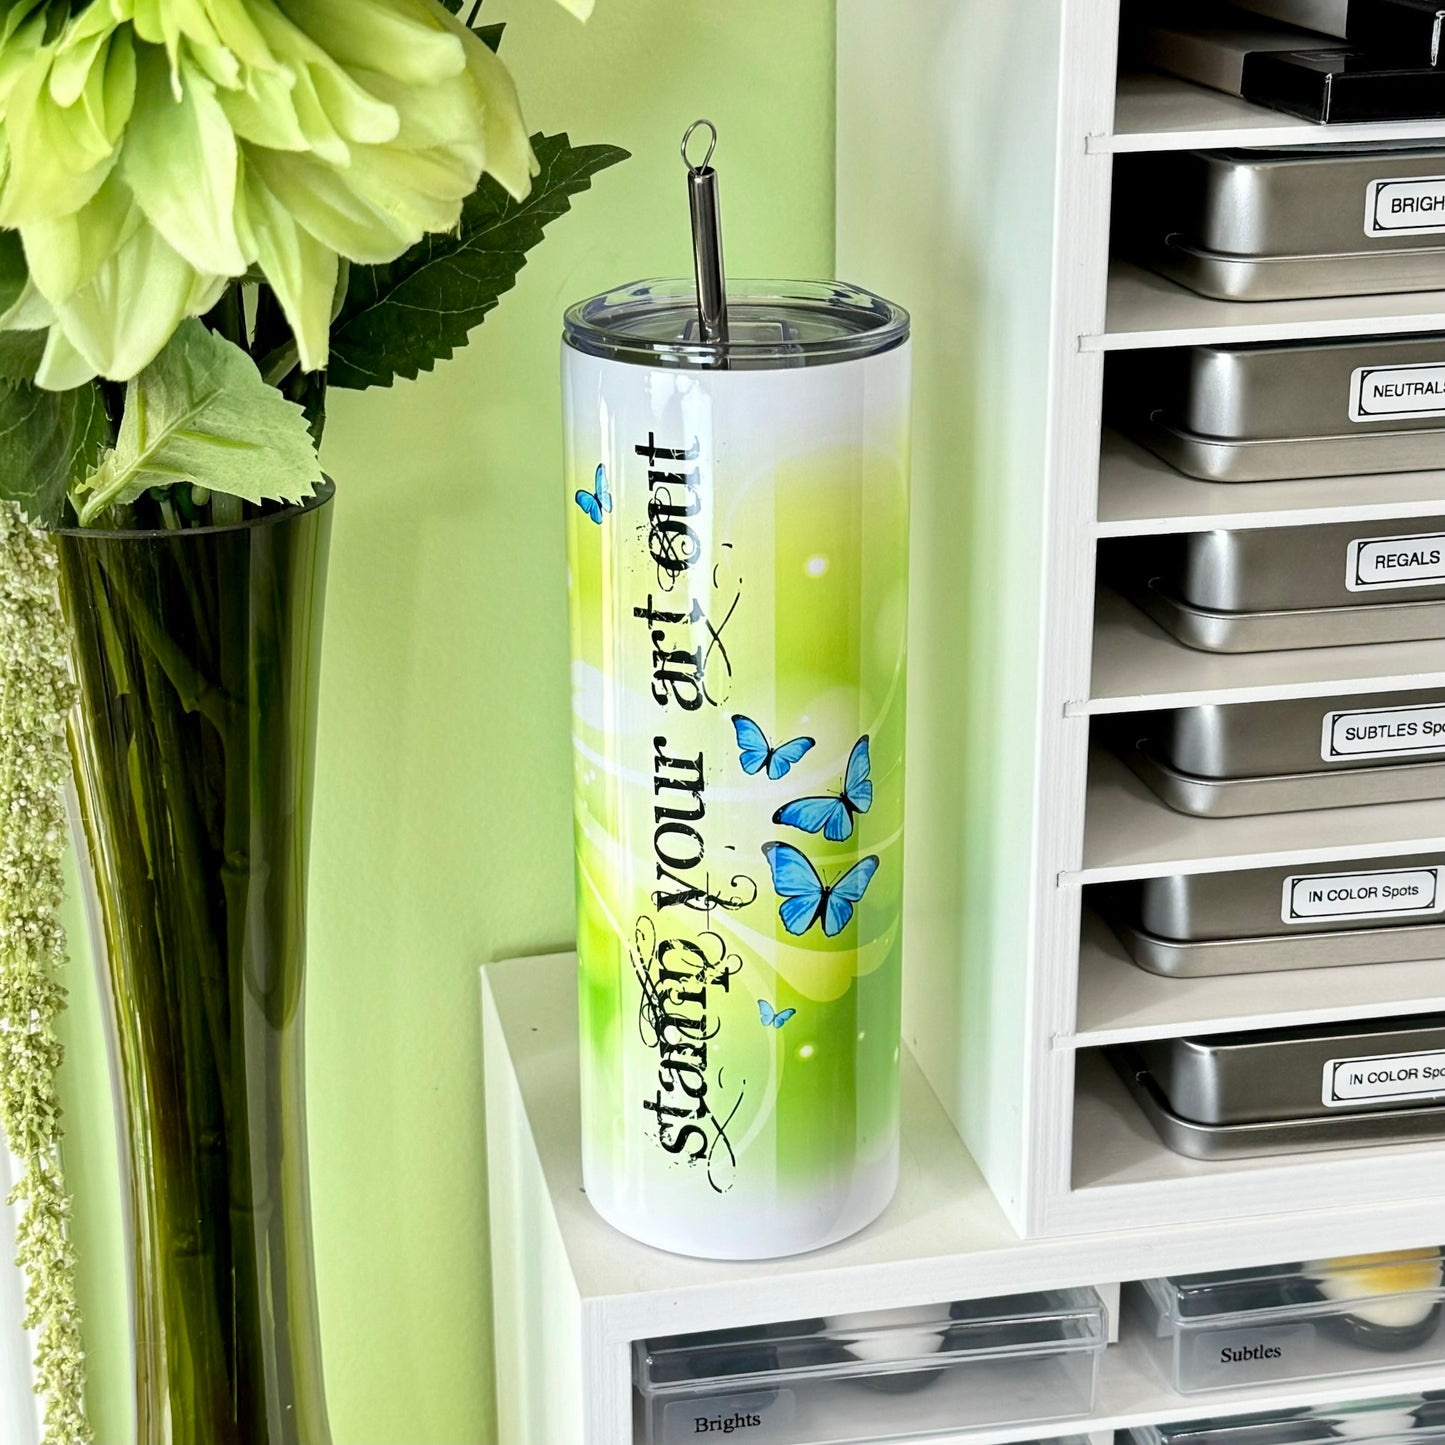 Stamp Your Art Out 20 oz. Skinny Tumbler by Rachel Tessman